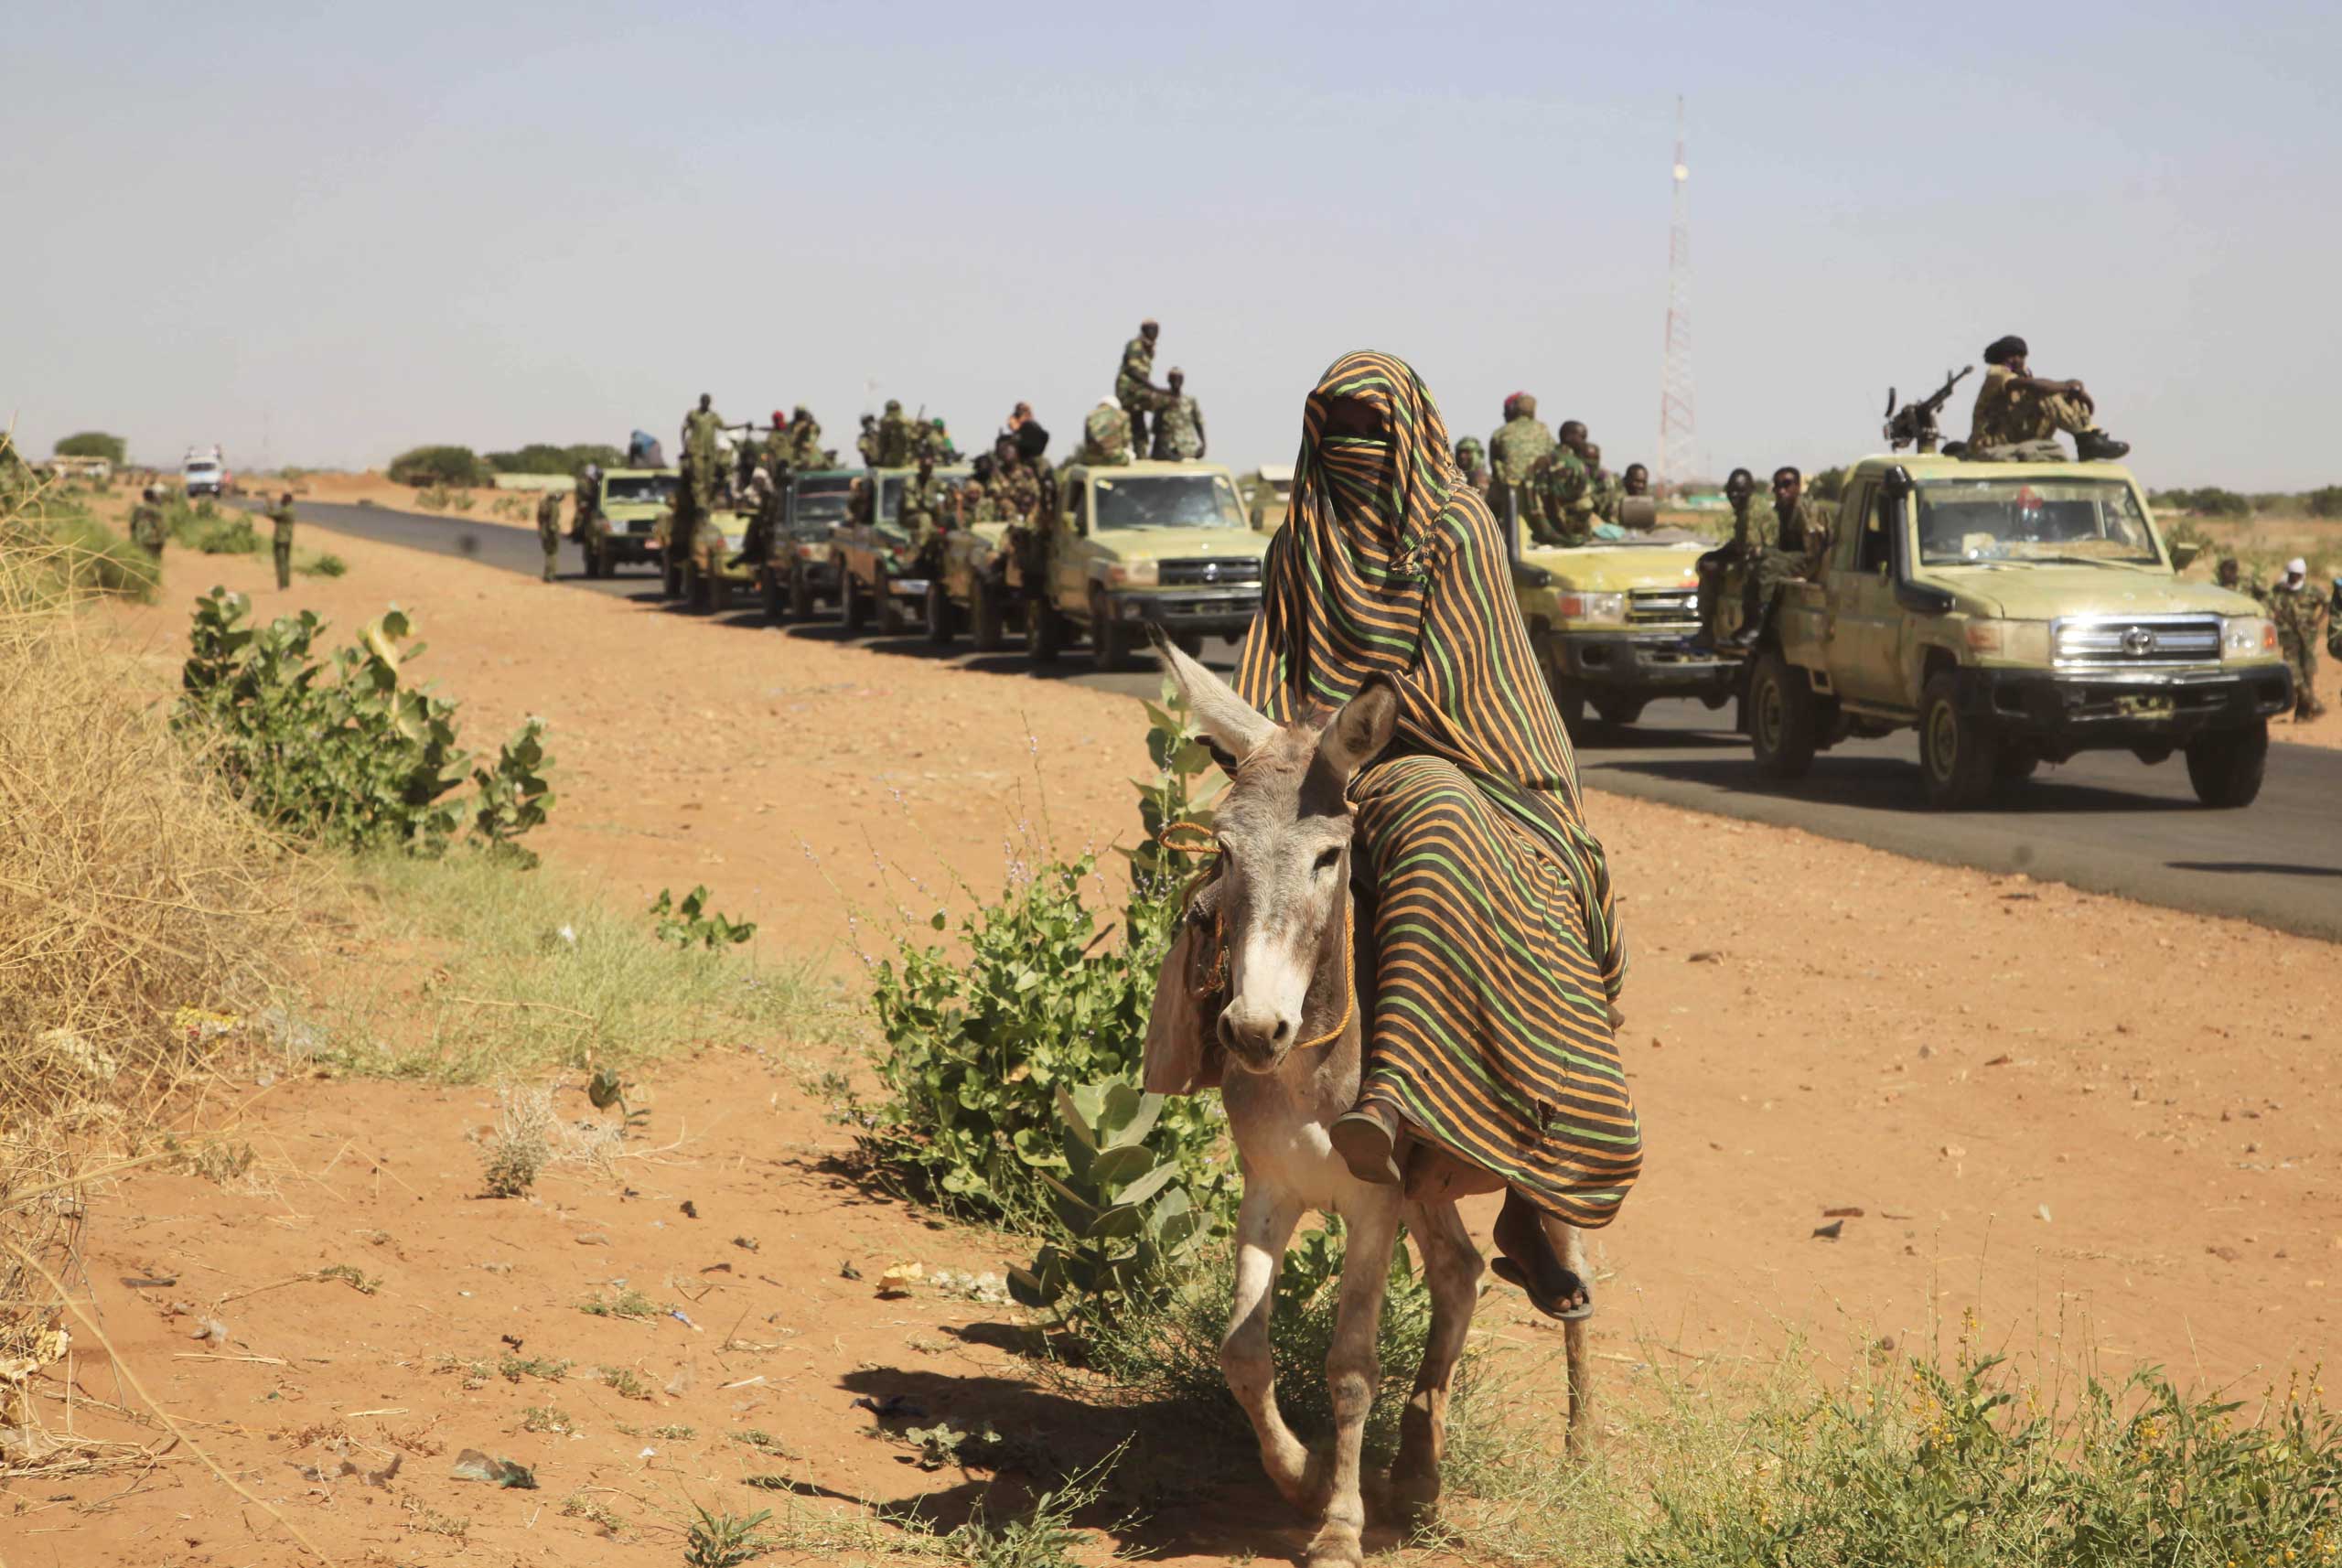 A woman rides a donkey past a convoy of government troops in Tabit village in the North Darfur region of Sudan, Nov, 2014. (Abd Raouf—AP)